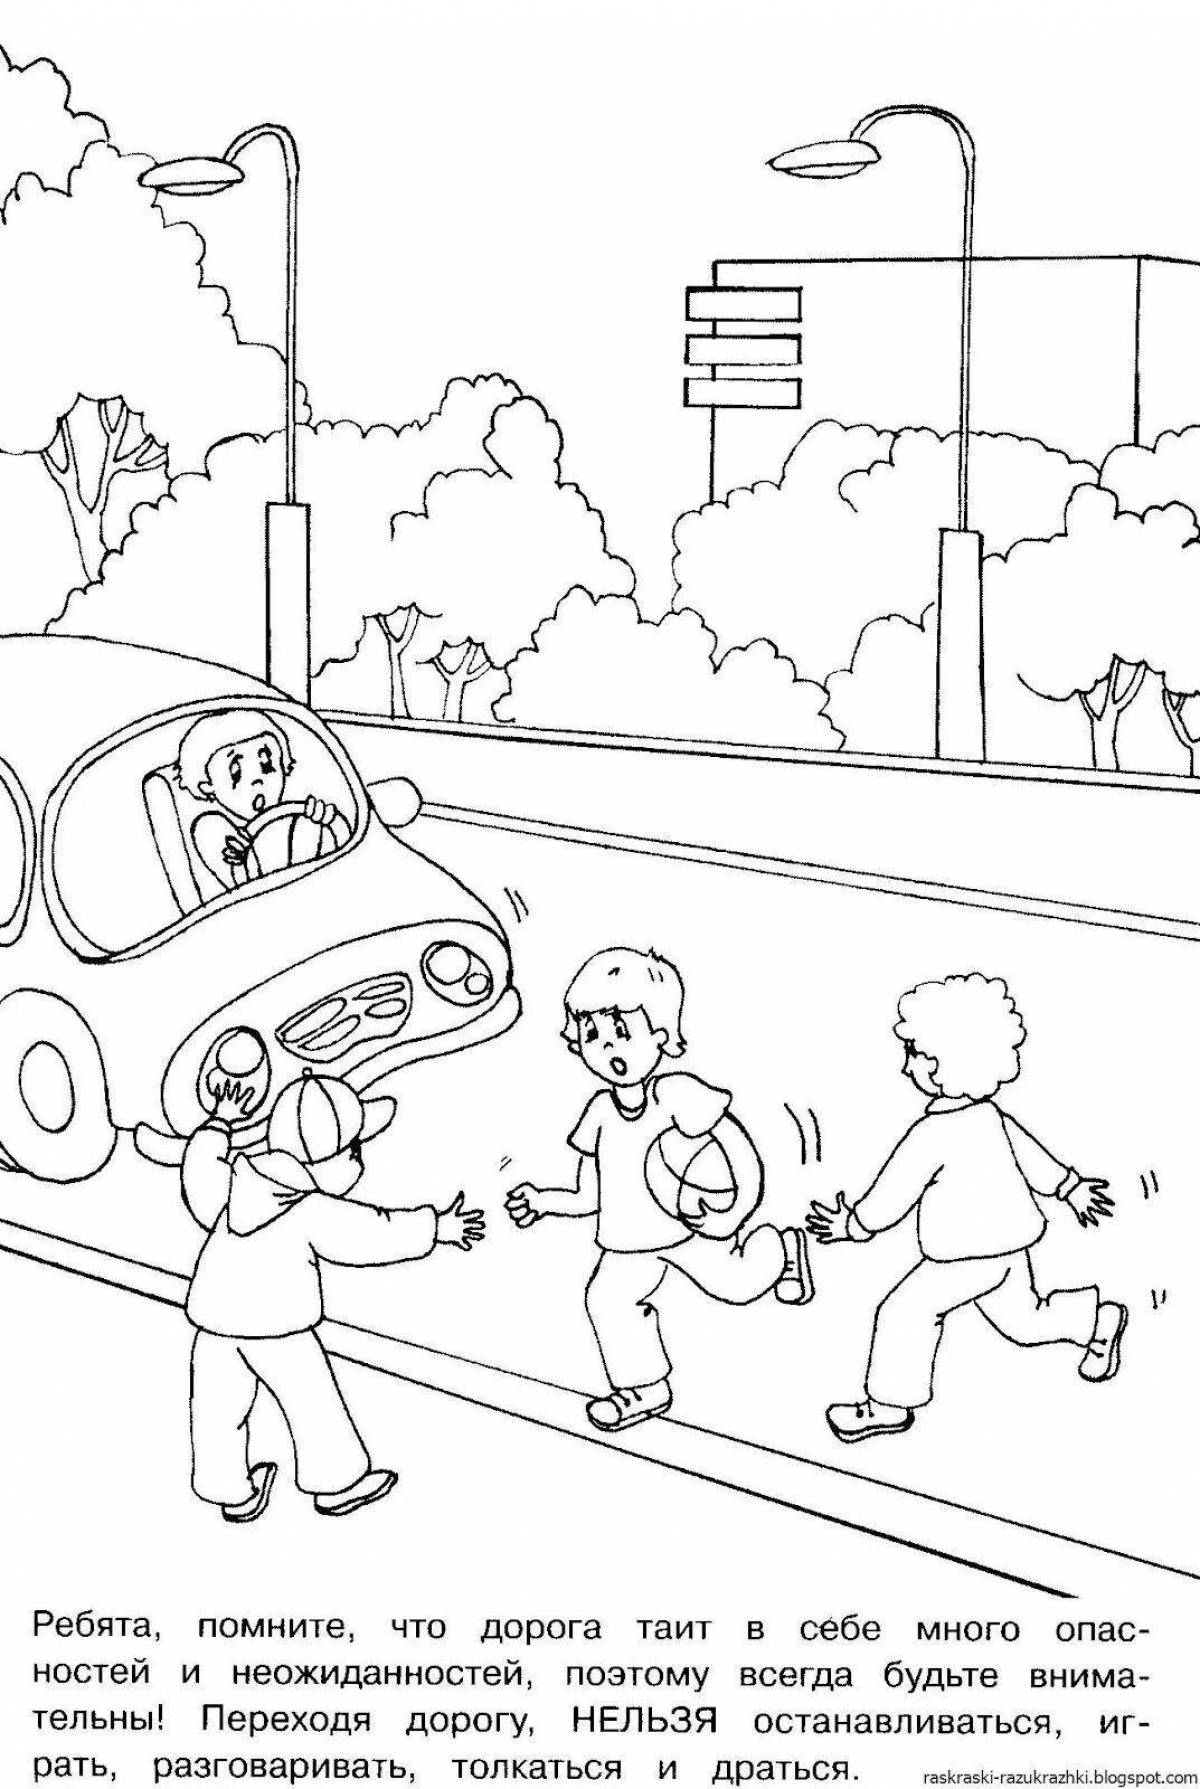 Stimulating coloring book according to the rules of the road in kindergarten